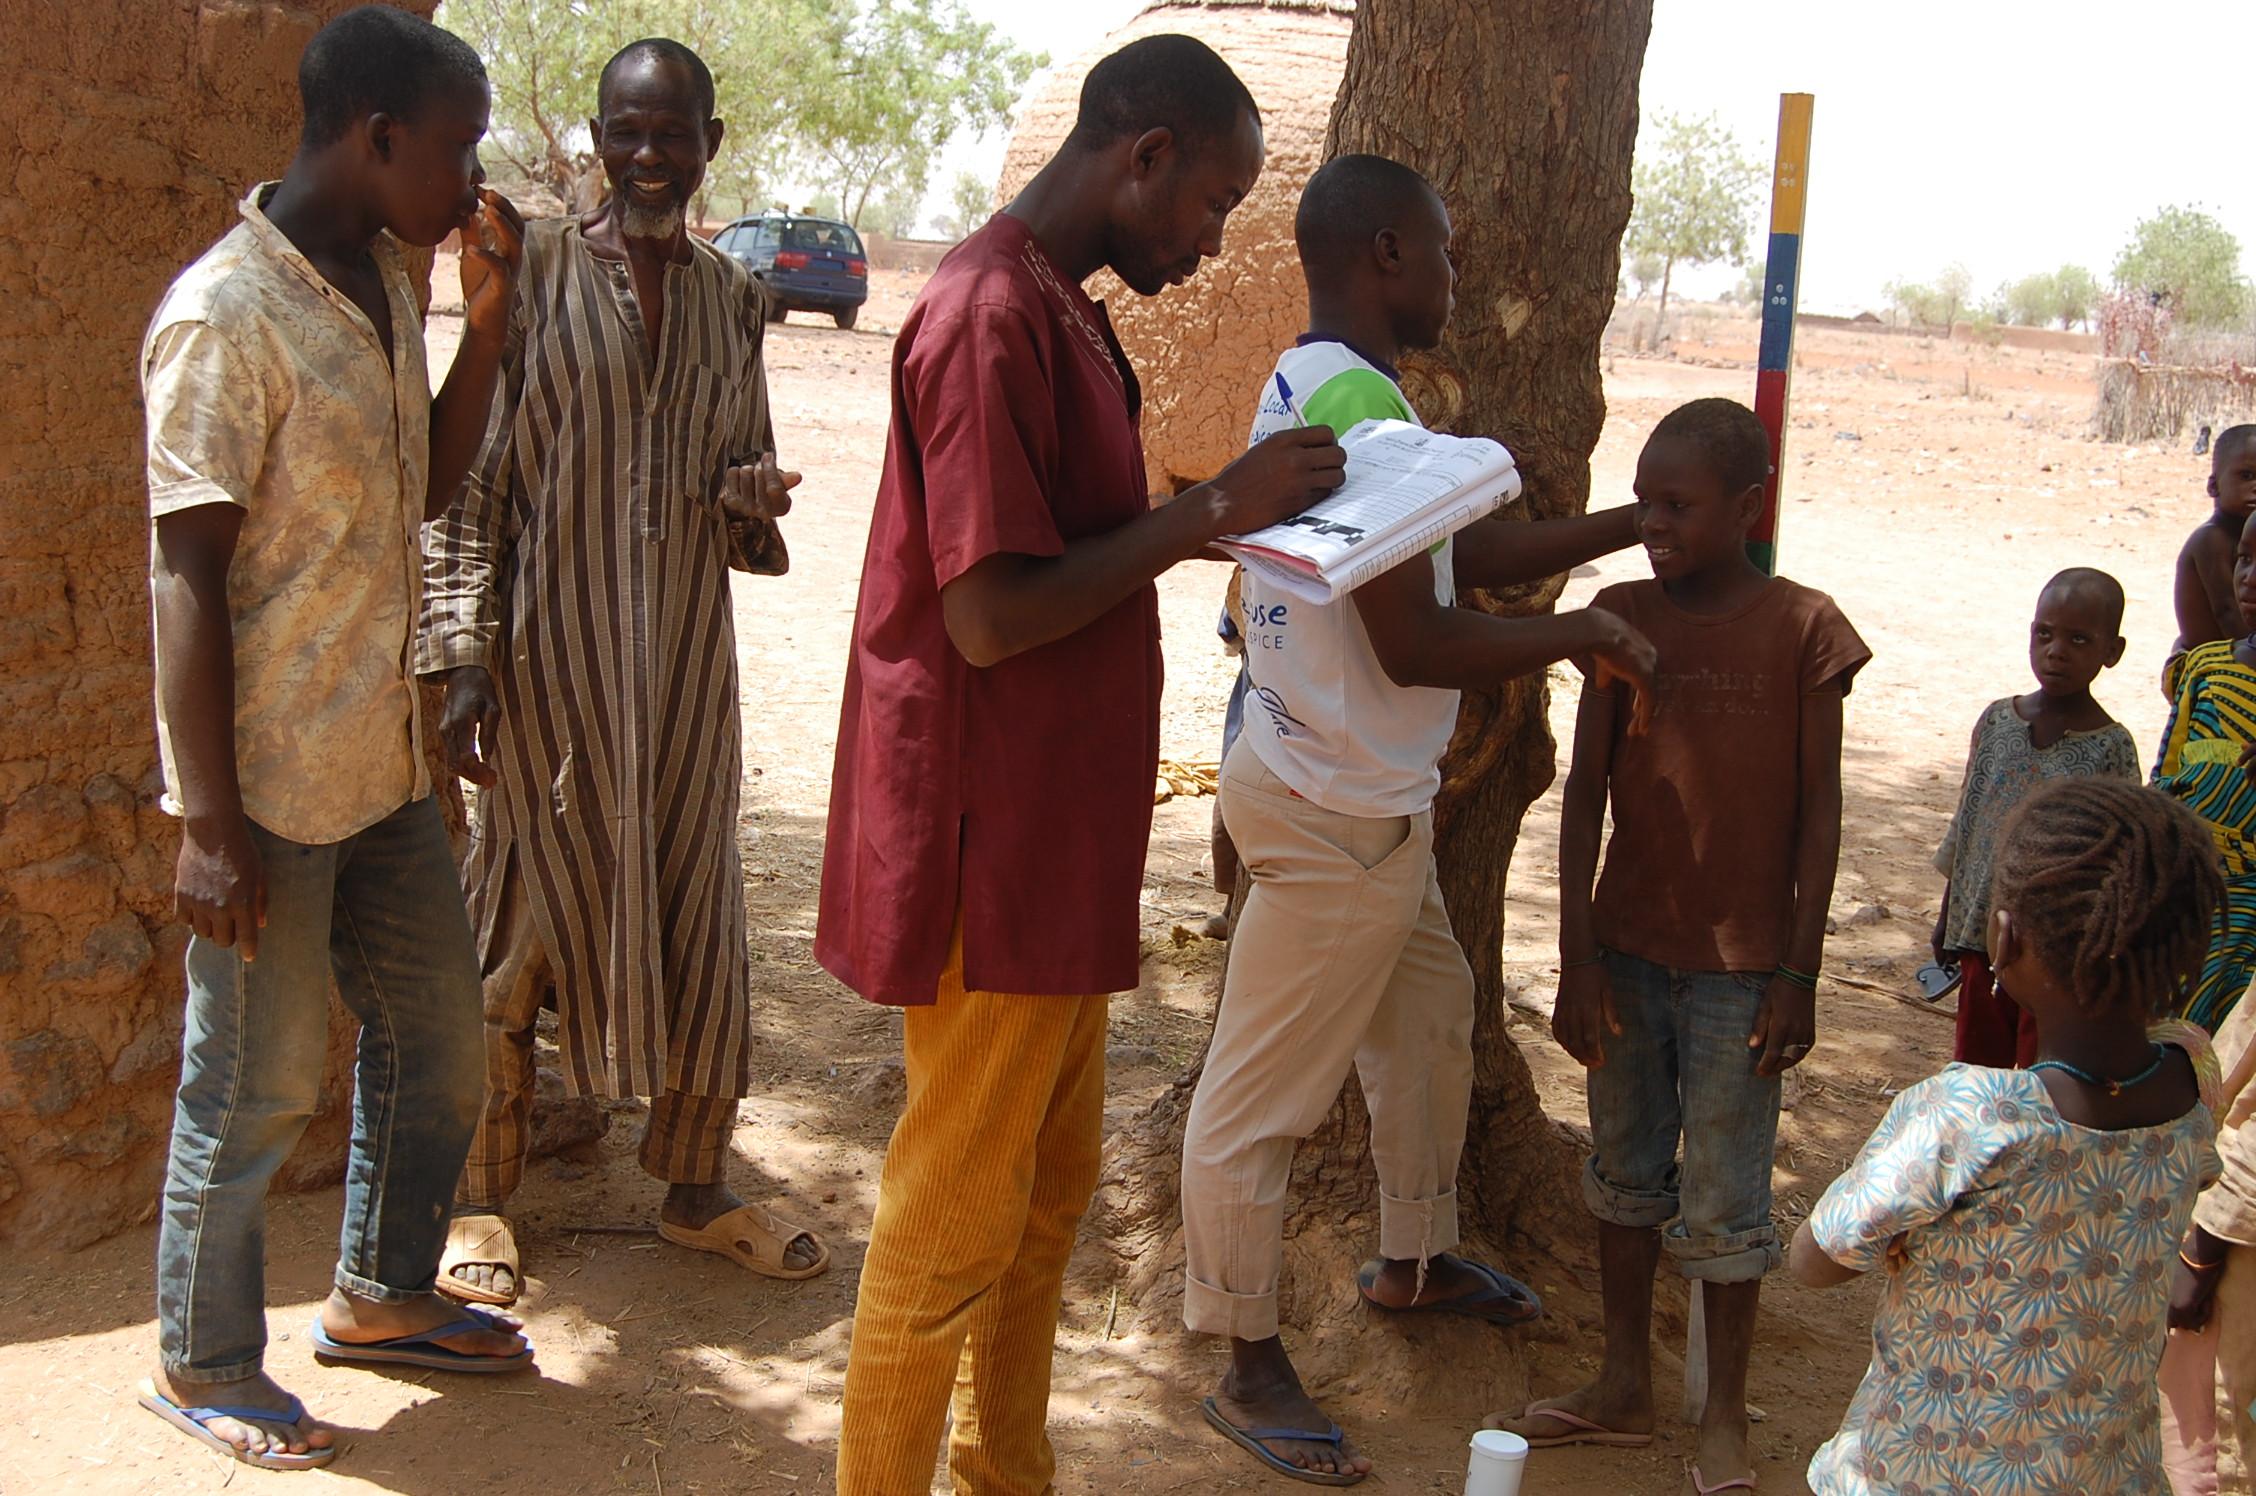 Kassimu, a health worker who has been selected as a community leader for the NTD programme, measures a young boy with a dose pole to determine the amount of medication they need to treat and prevent river blindness in Nigeria. 